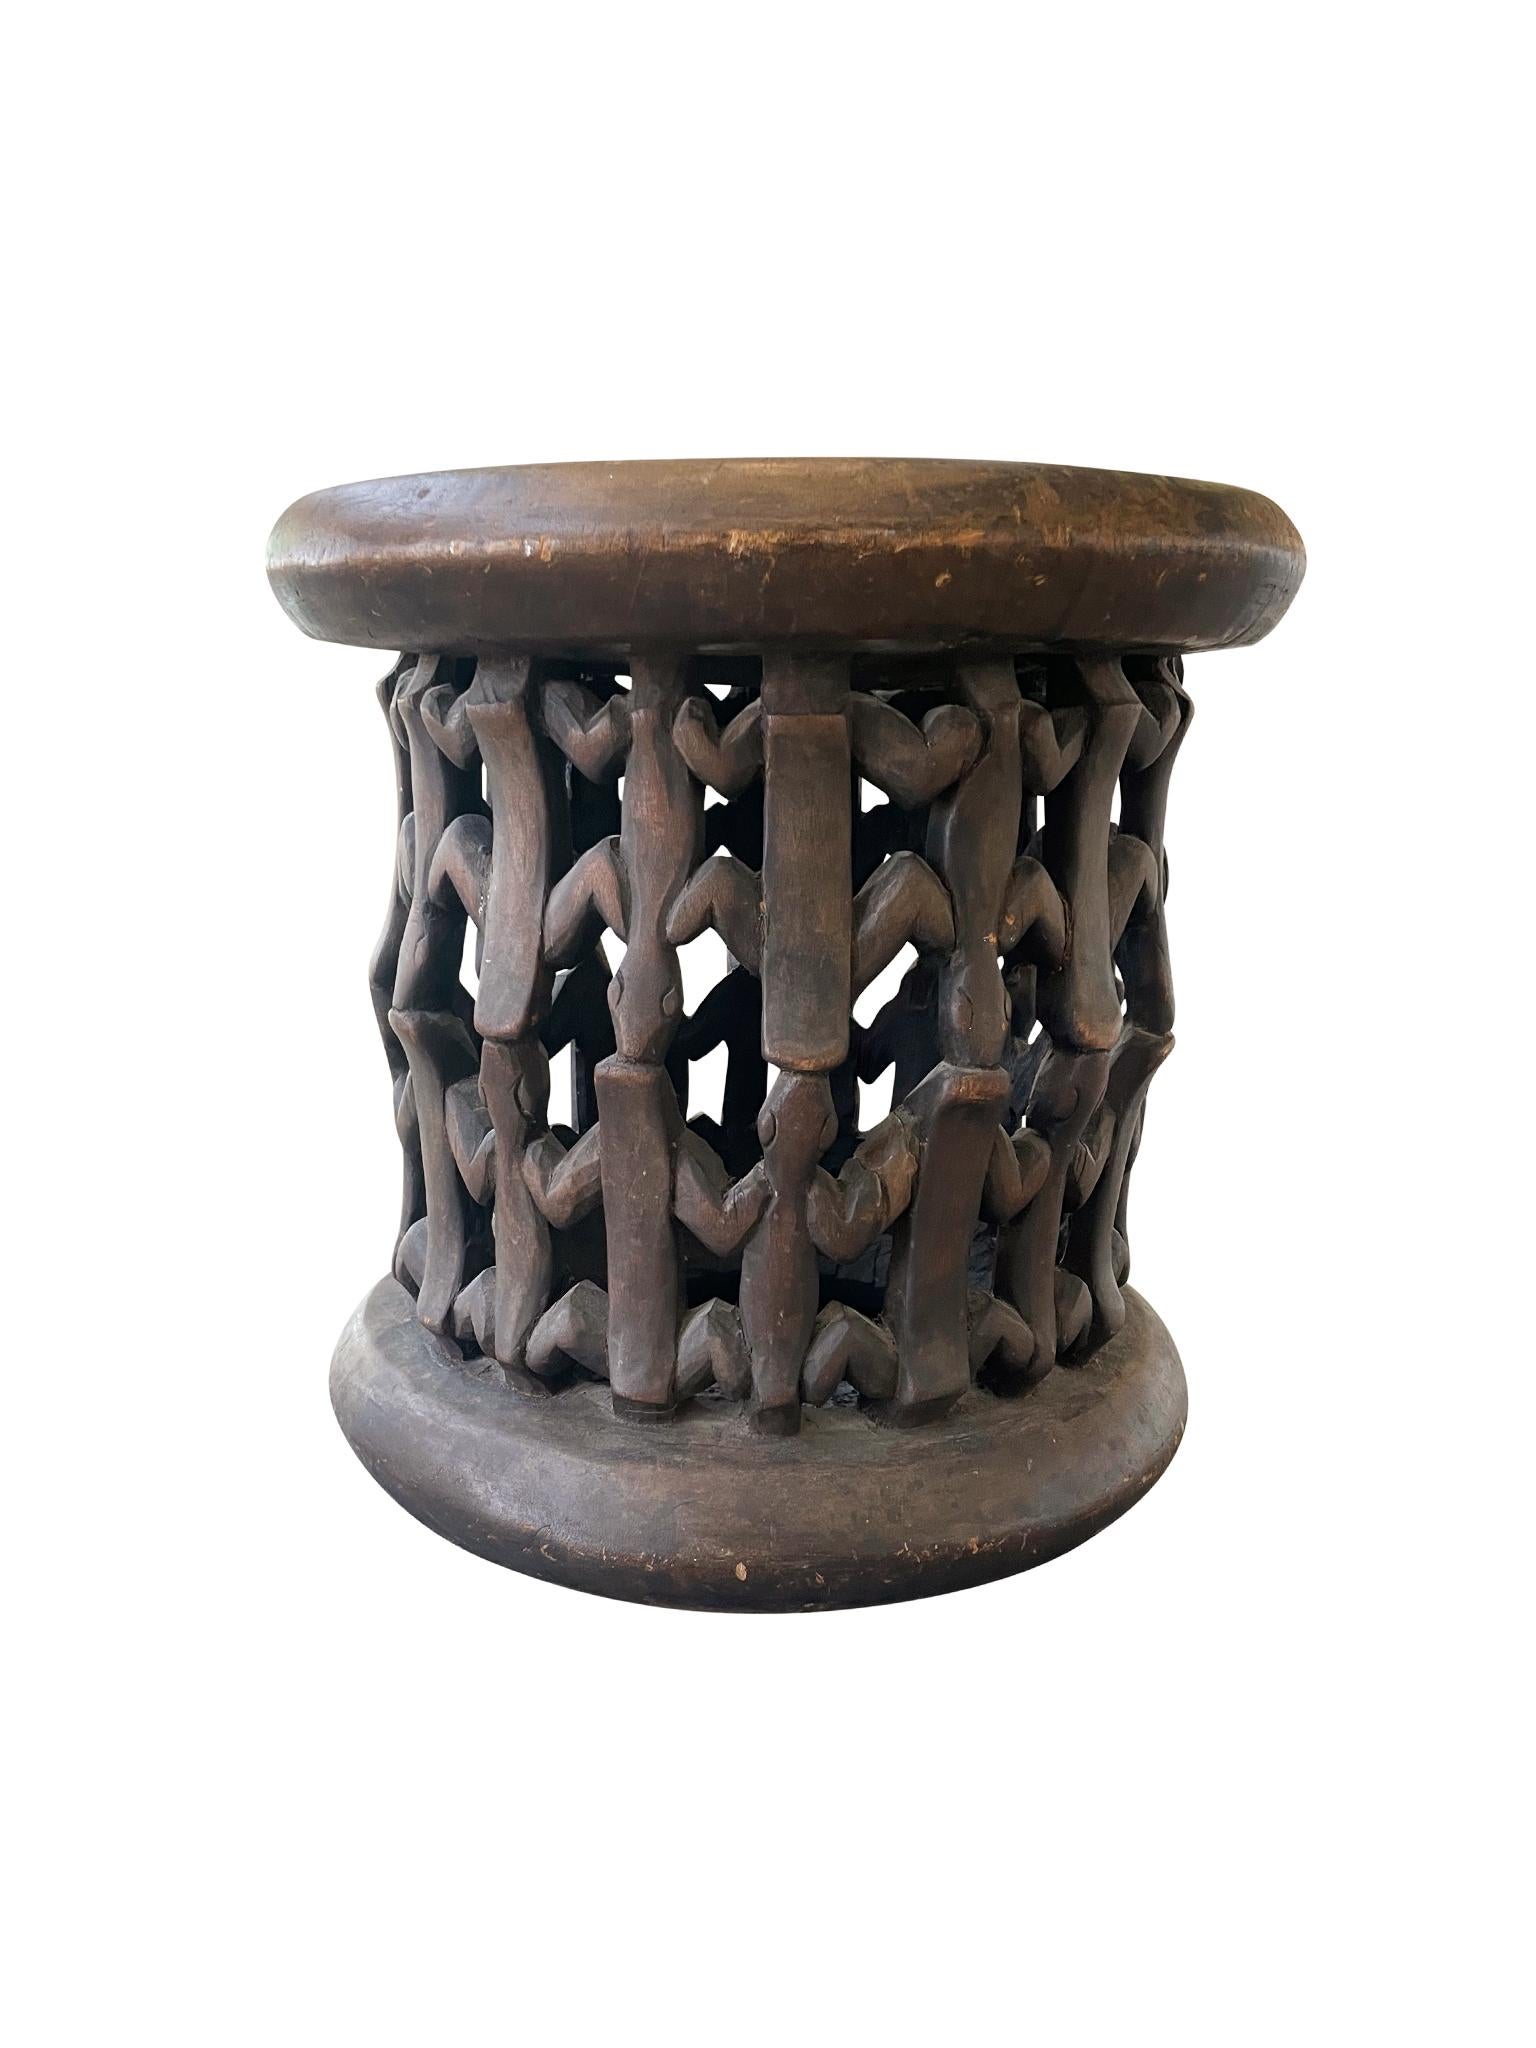 Hand-carved wood Bamileke table from Cameroon, Mid-Late 20th Century. The body of the table is intricately designed with a network of lizard motifs. We love the smoothed edges of the top and the overall organic textures and tone of the